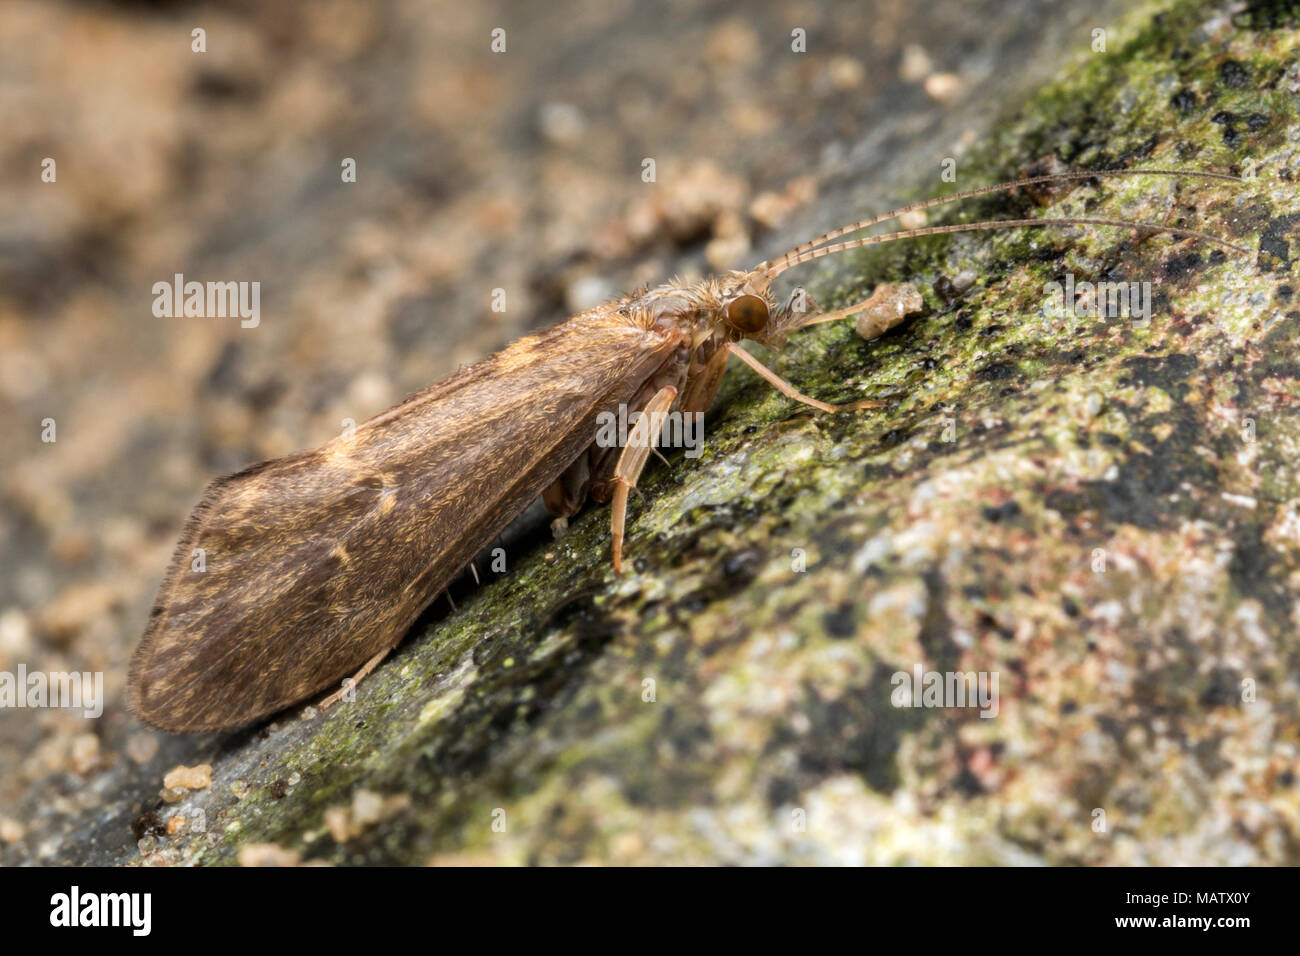 Caddisfly in the family Trichoptera, at rest on stone wall. Tipperary, Ireland Stock Photo